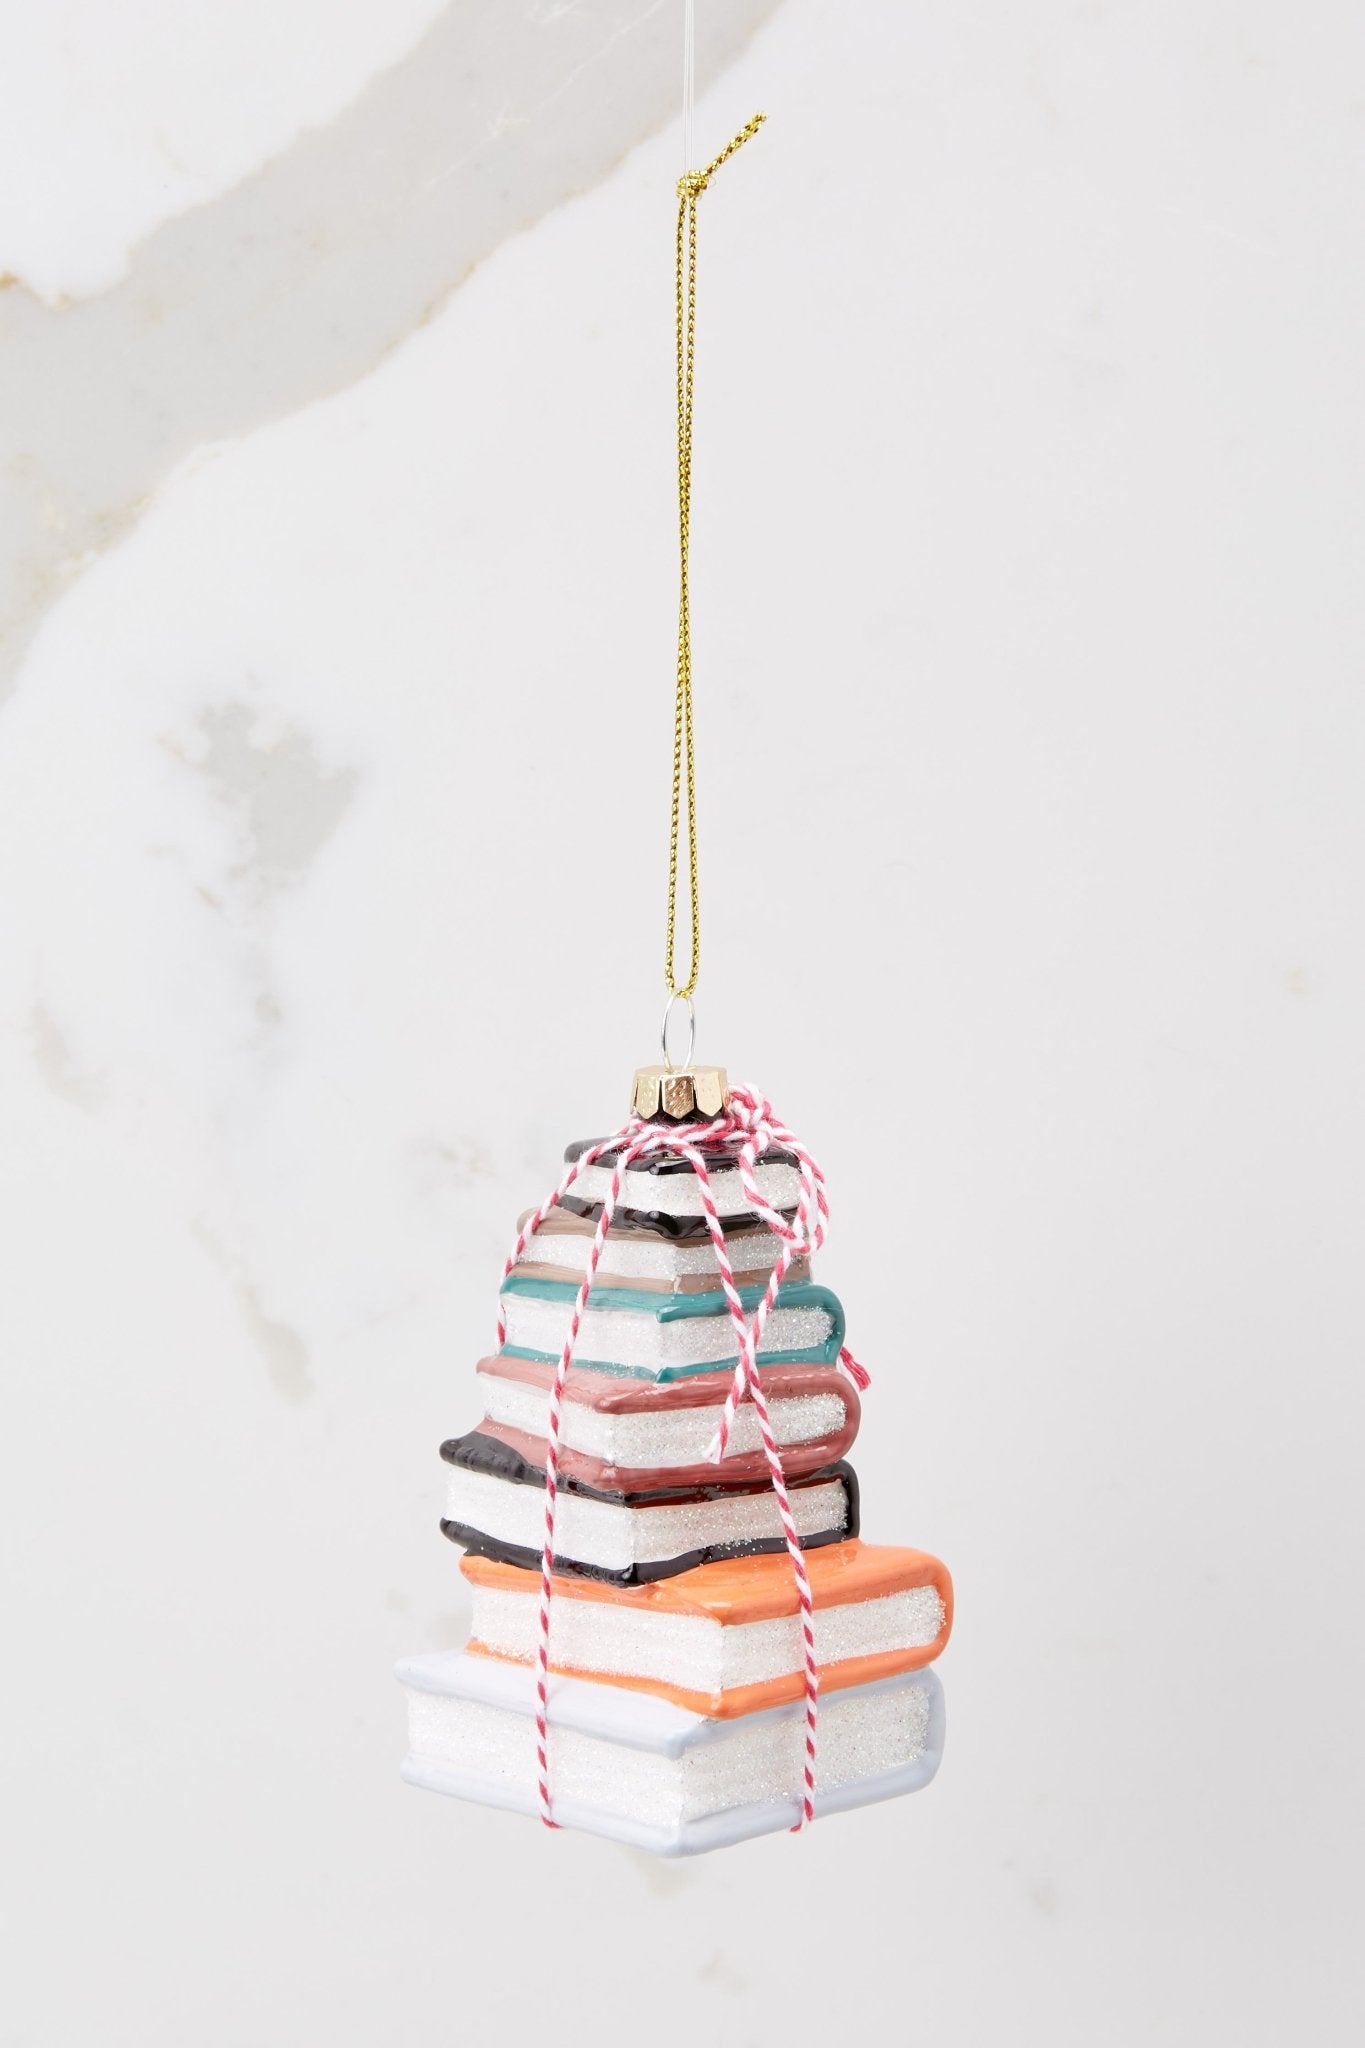 Back view of this ornament that features a design of stacked books with glitter accents and striped string.